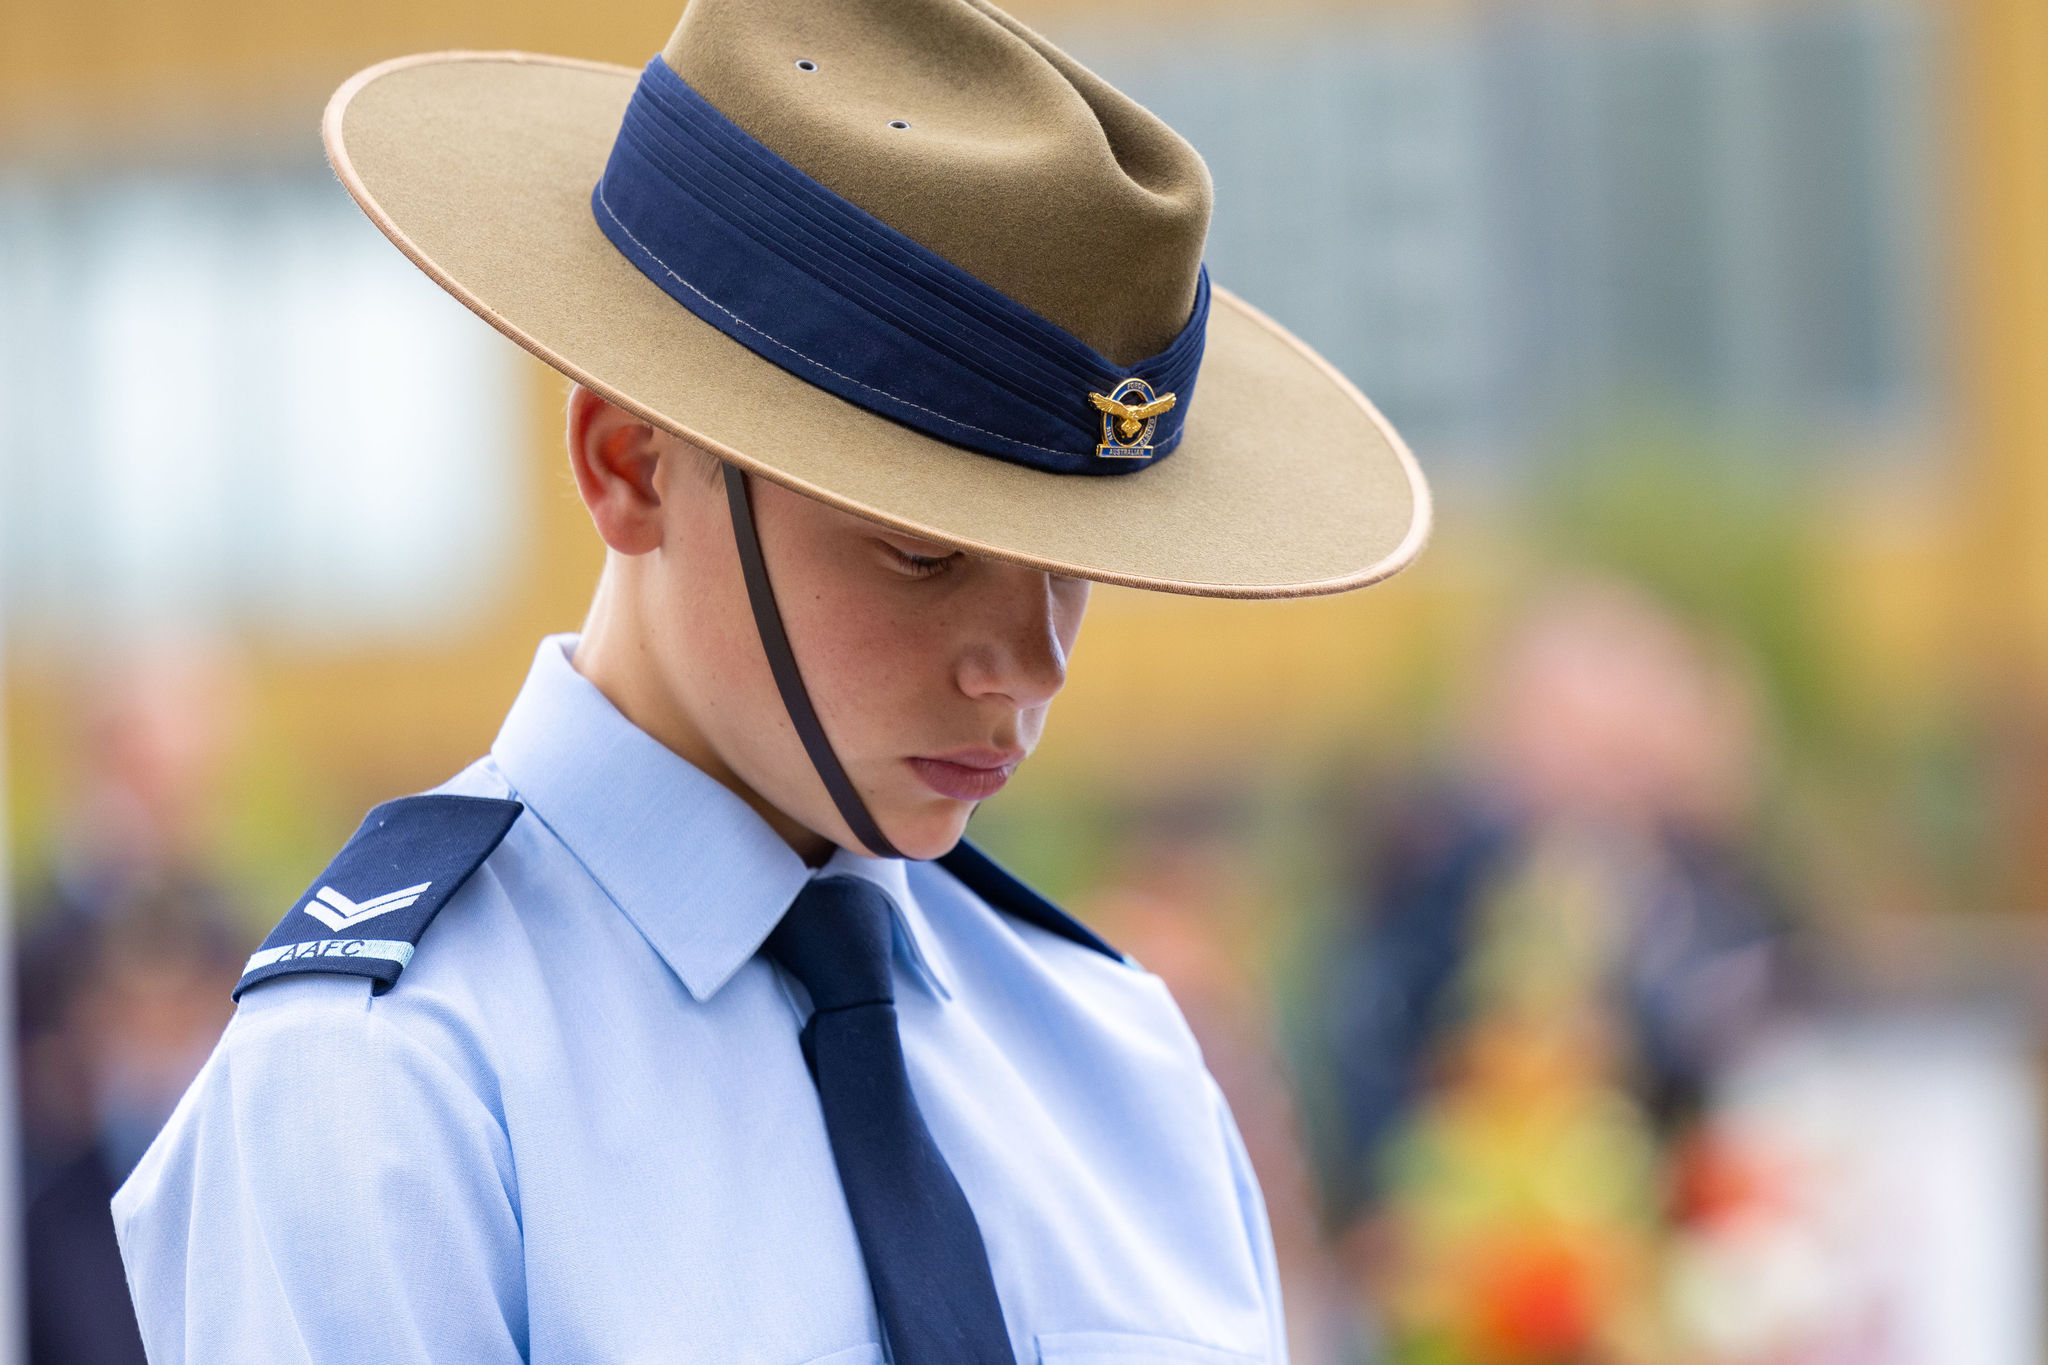 A Special Anzac Day Service